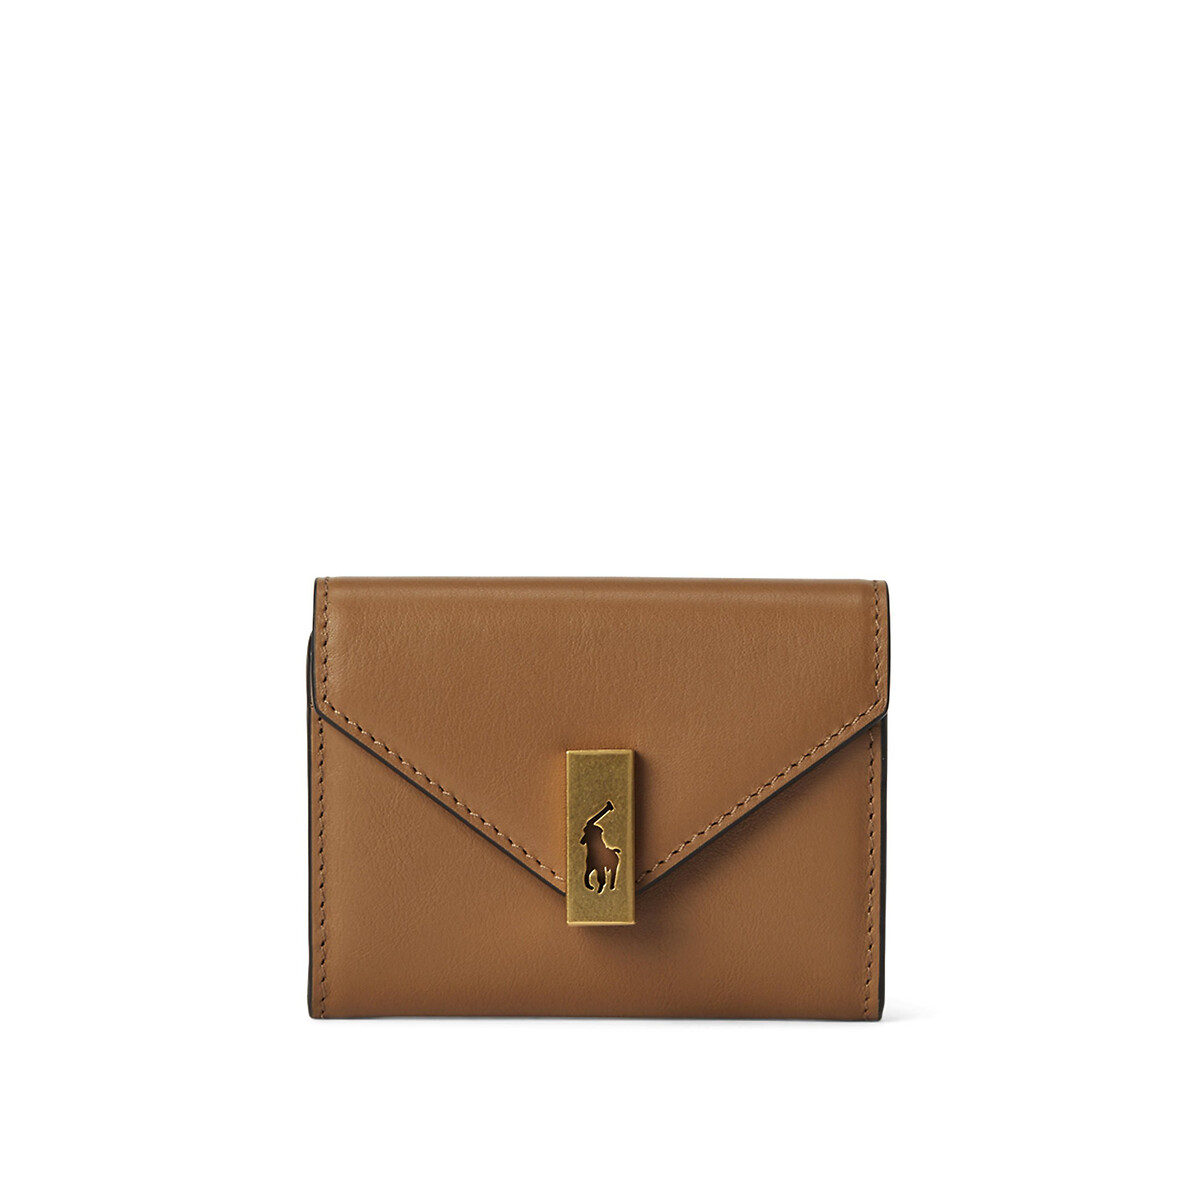 Image of Smooth Leather Card Holder with Envelope Flap